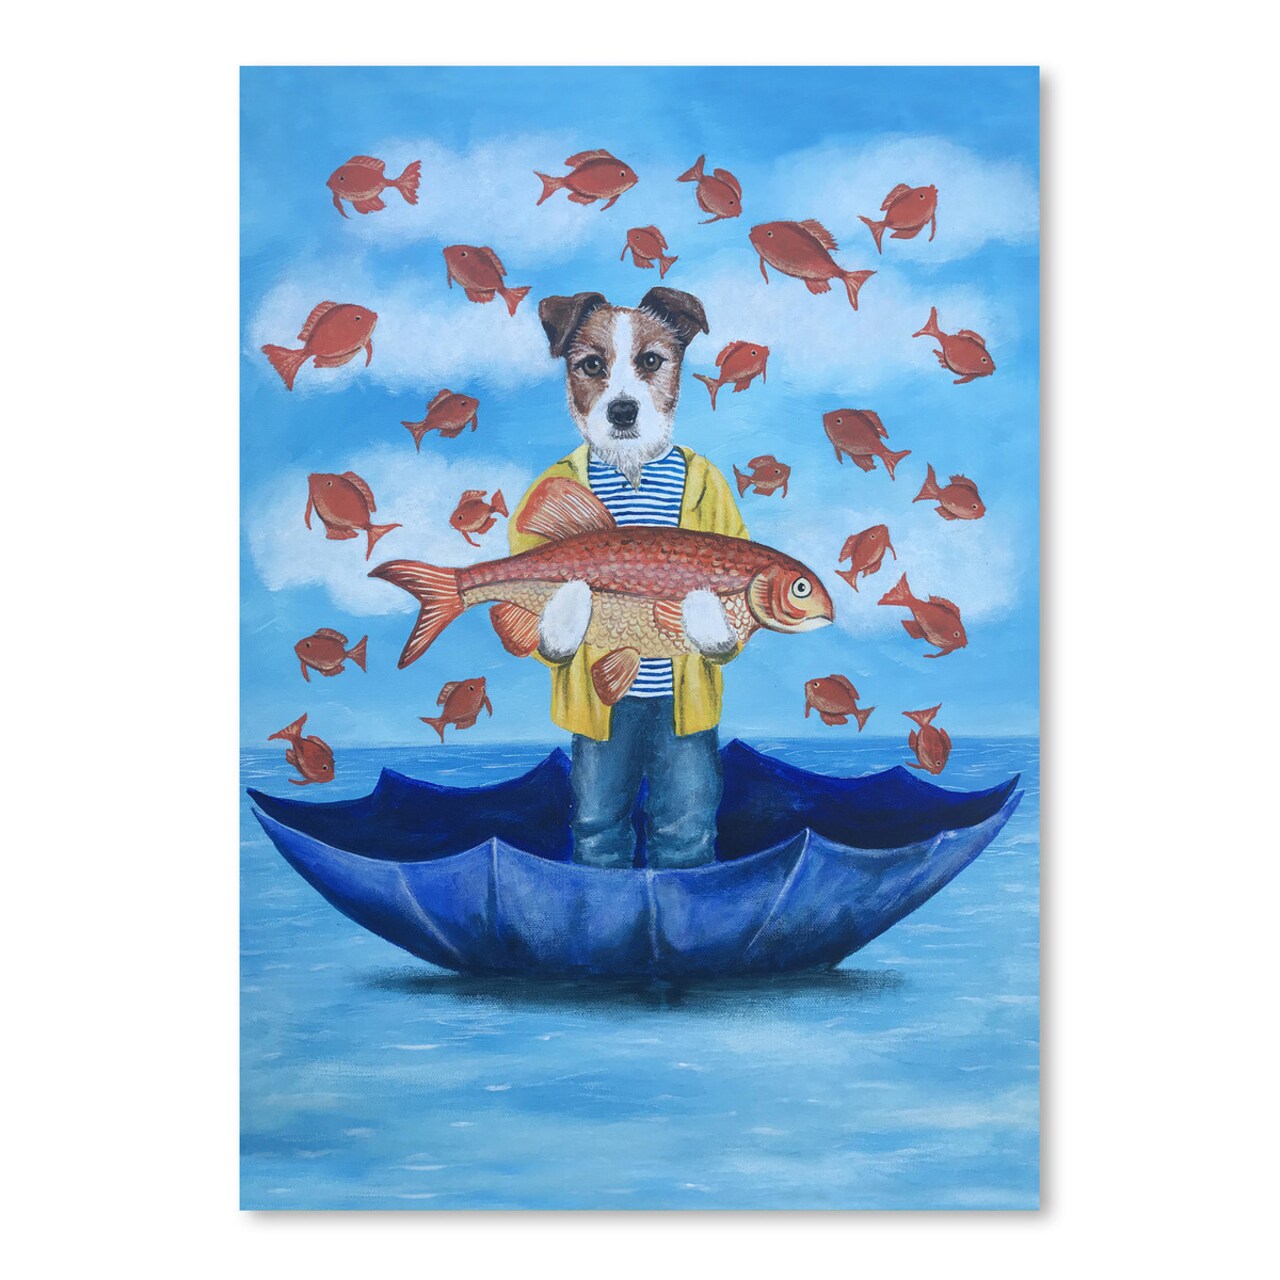 Jack Russell With Big Fish by Coco De Paris  Poster Art Print - Americanflat